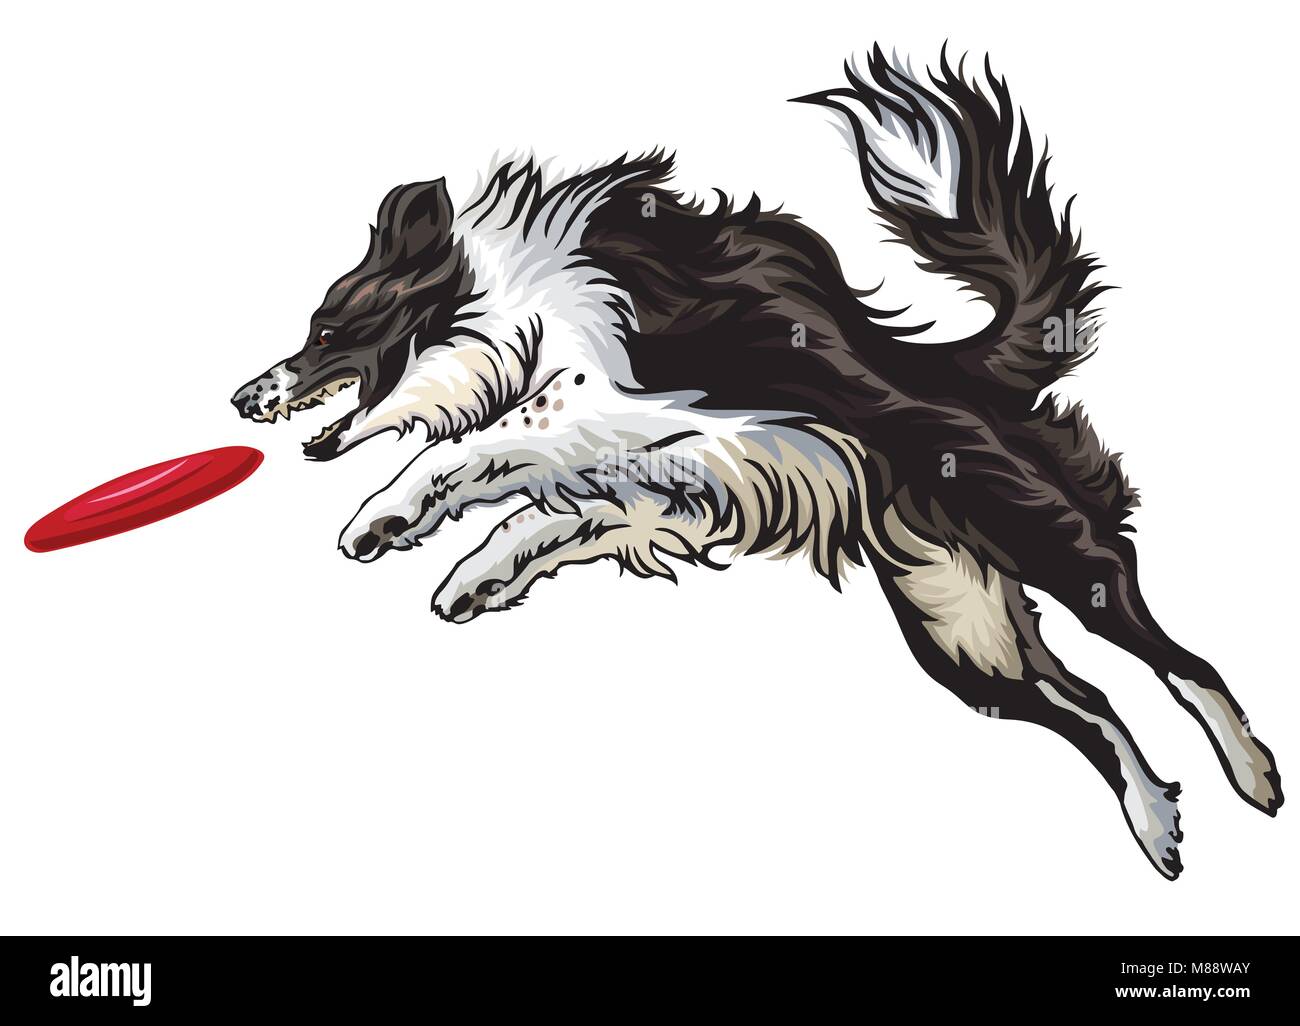 Vector colorful illustration with dog (border collie) isolated on white background. Fluffy black and white dog in profile view jumping and catching re Stock Vector